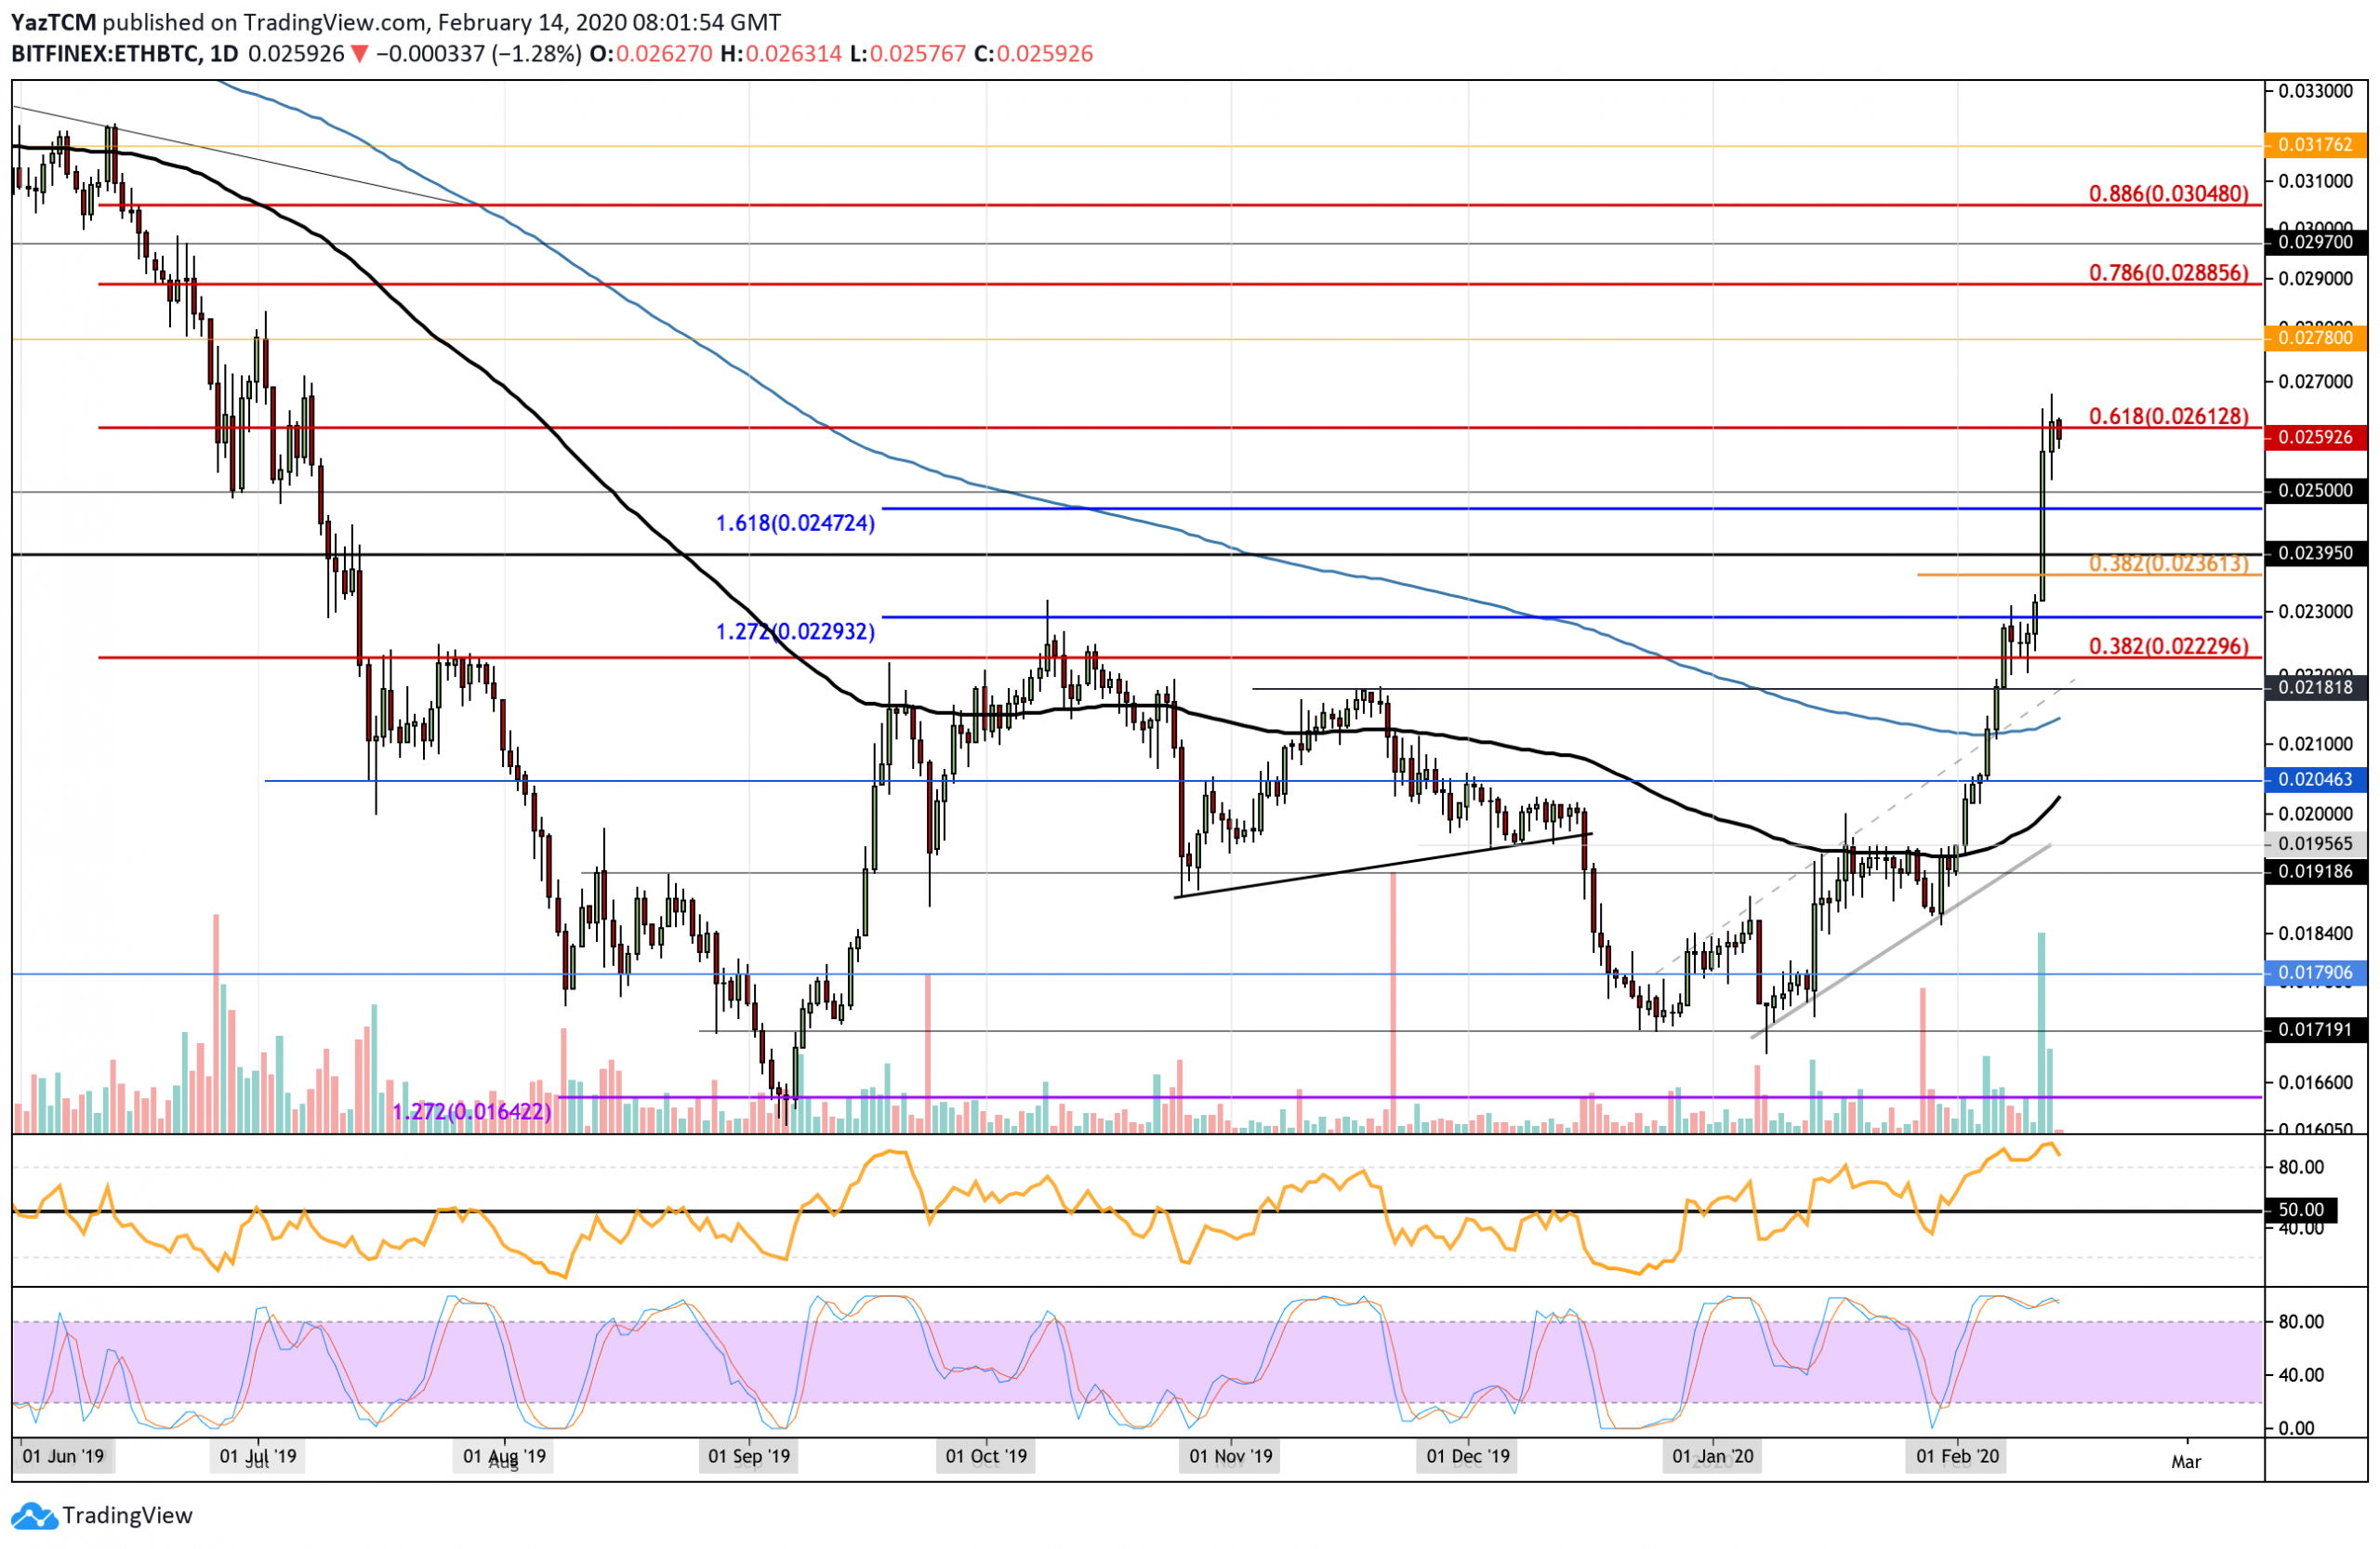 Ethereum Price Analysis: ETH Pulls Back To $265 But Are The Bulls Plotting Another Move?